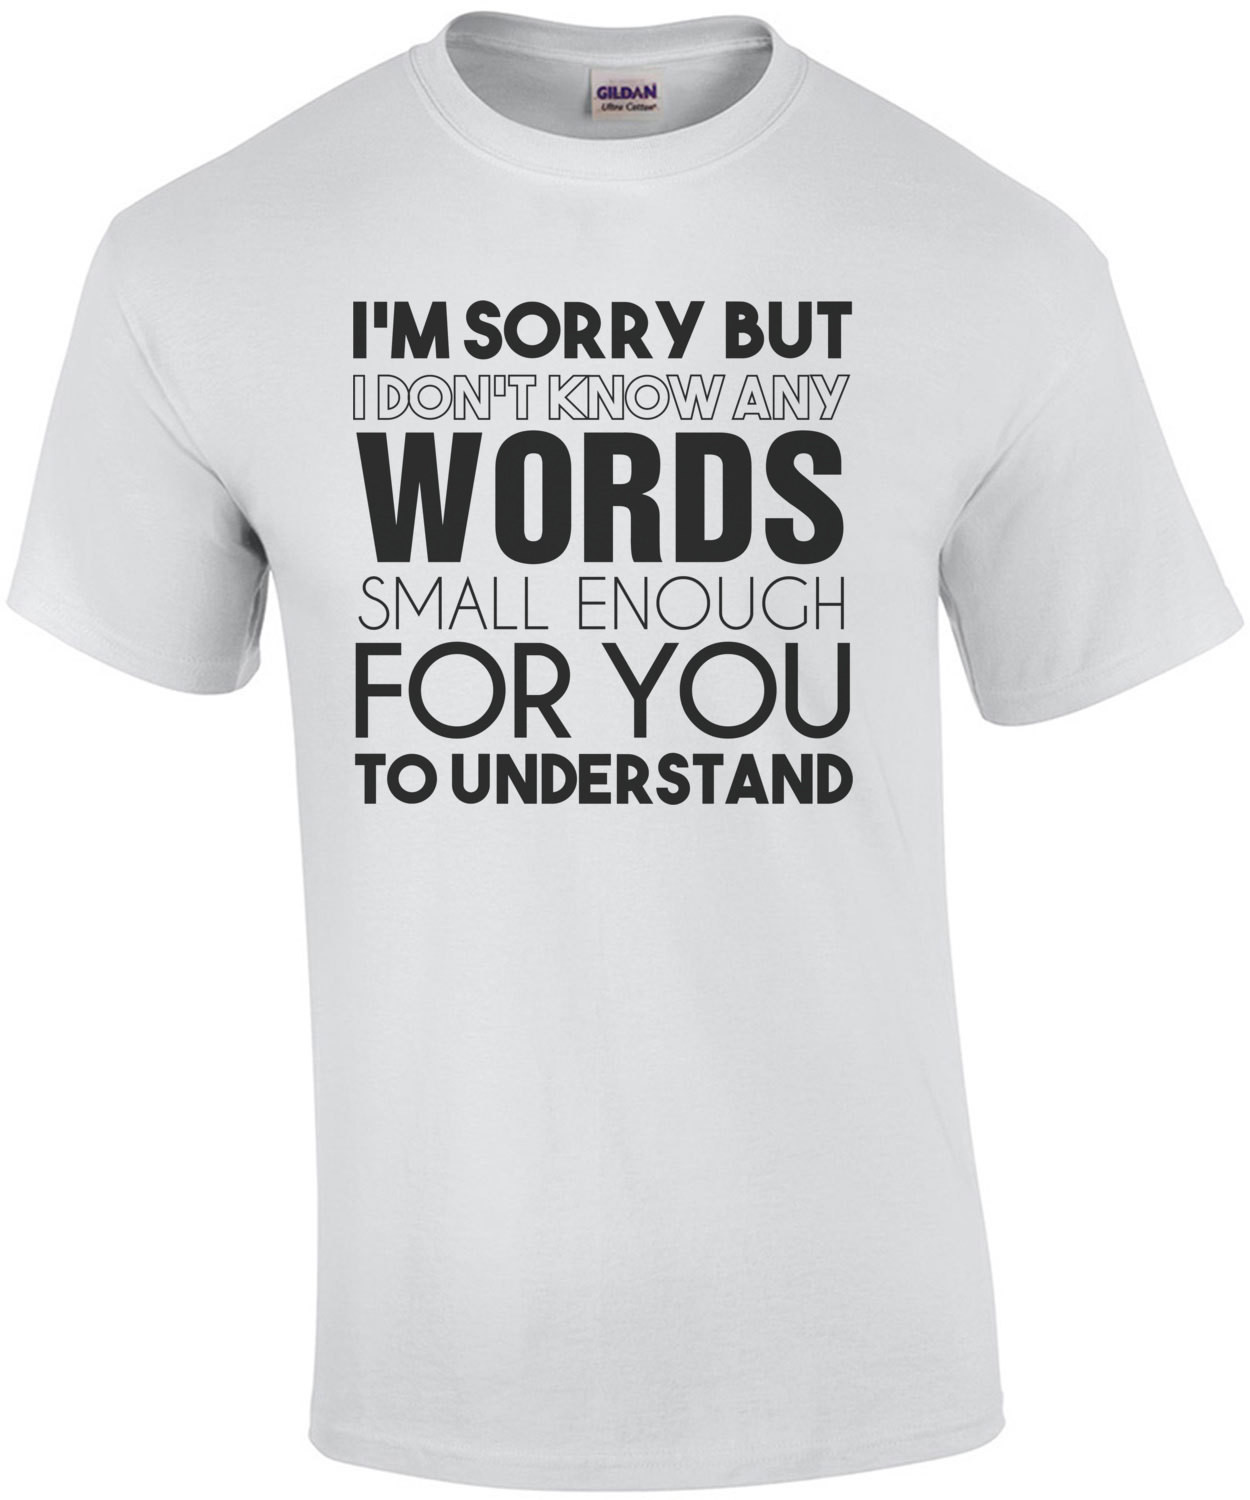 I'm sorry but I don't know any words small enough for you to understand. Funny sarcastic t-shirt